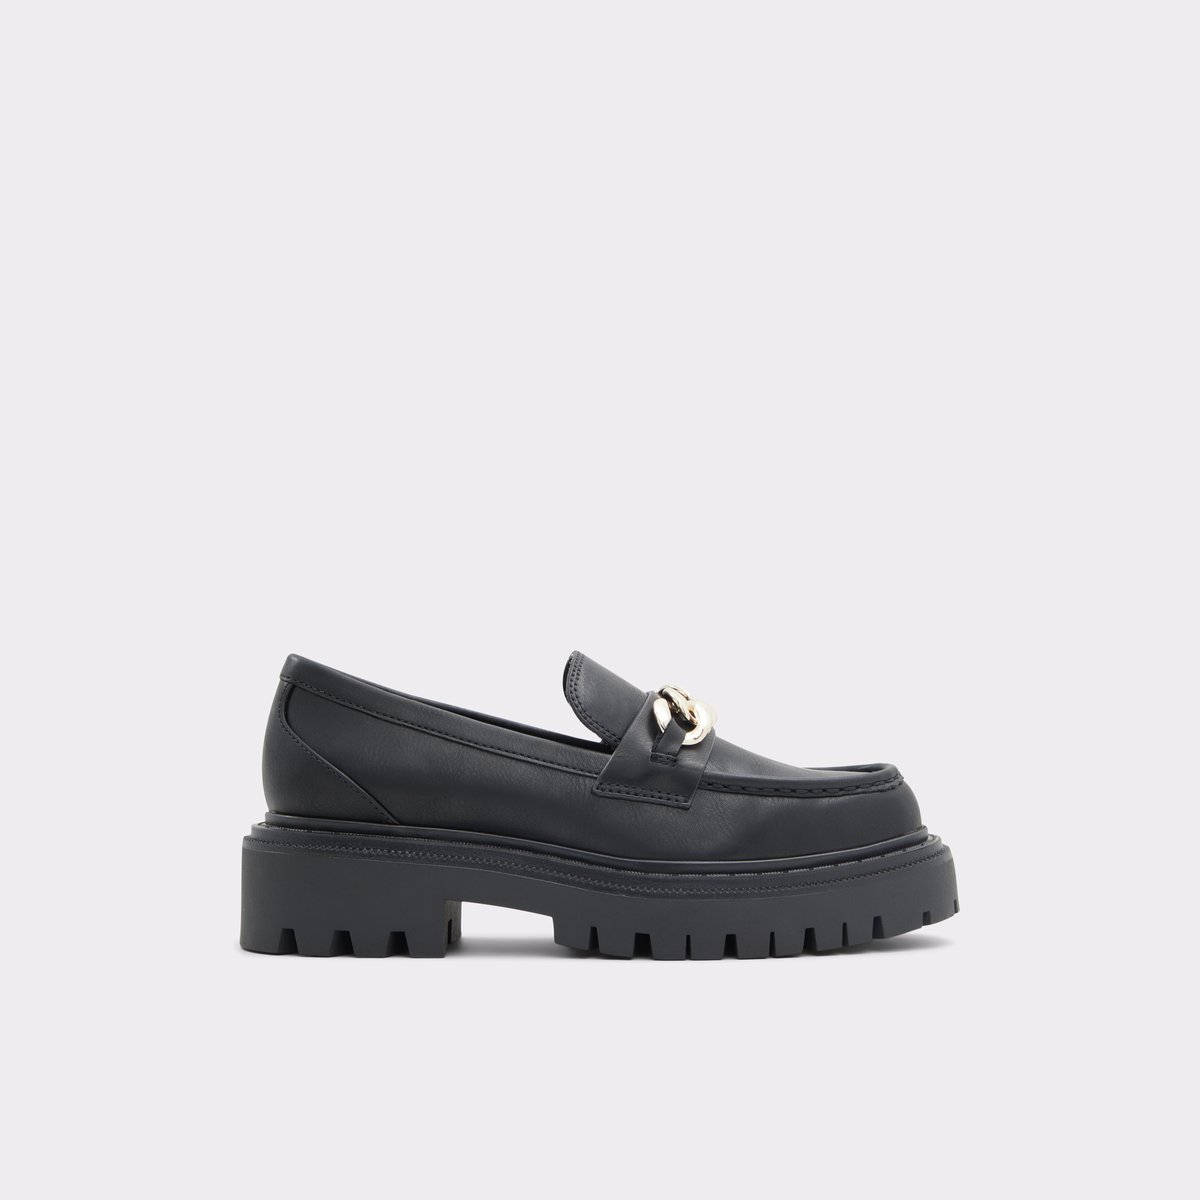 Brixton Black Synthetic Smooth Women's Loafers & Oxfords | ALDO Canada